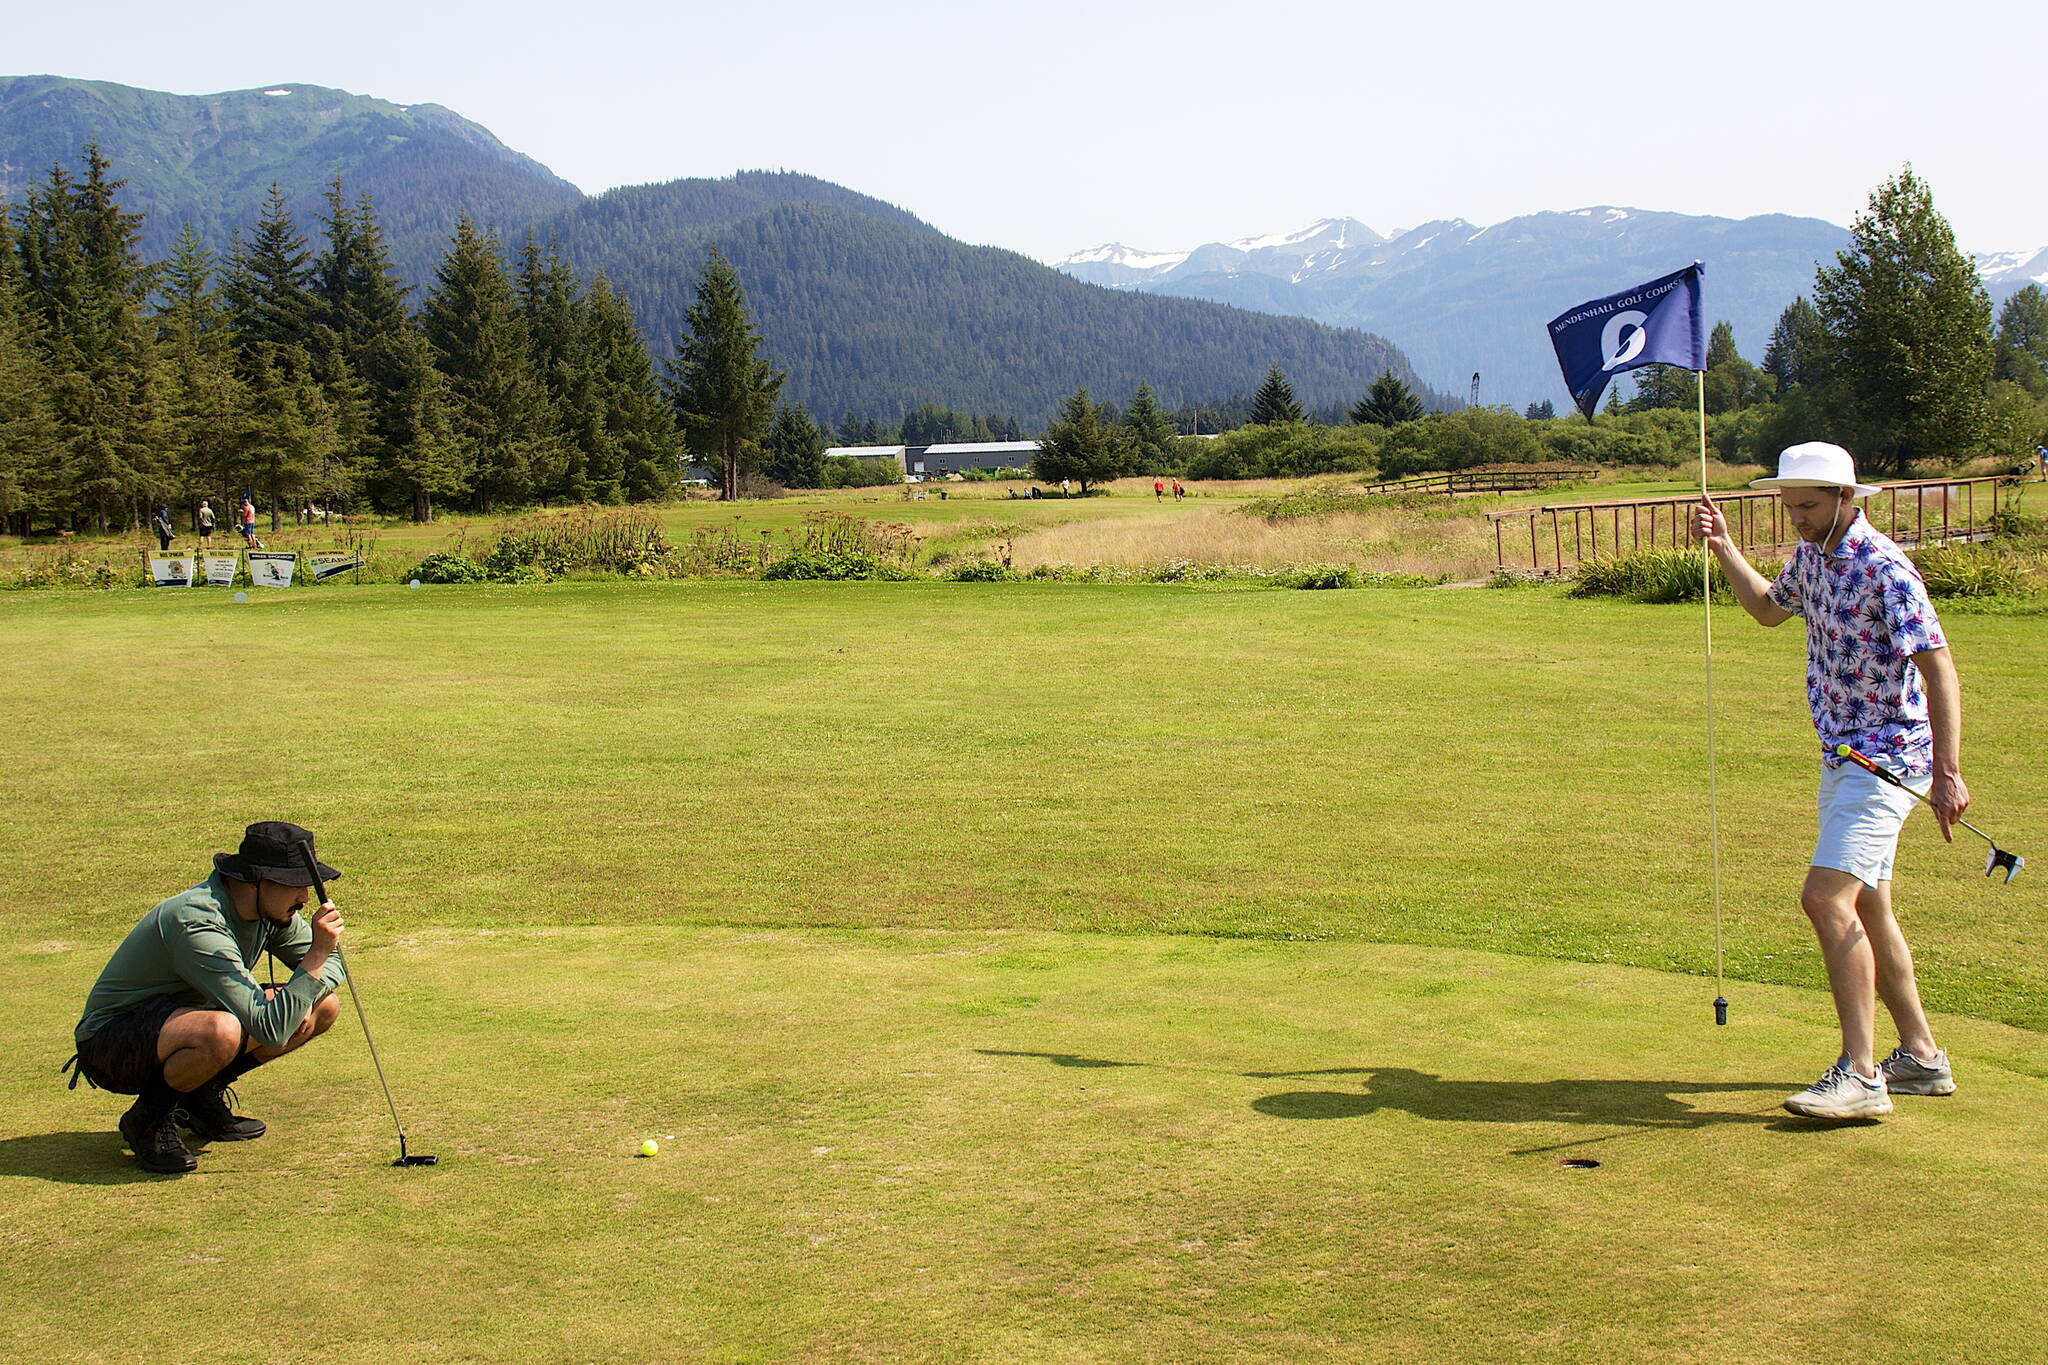 Alan Fisher evaluates a putt on the sixth hole as Matt Seymour holds the flag during the Annual Greater Juneau Chamber of Commerce Golf Classic on Saturday at the Mendenhall Golf Course. (Mark Sabbatini / Juneau Empire)